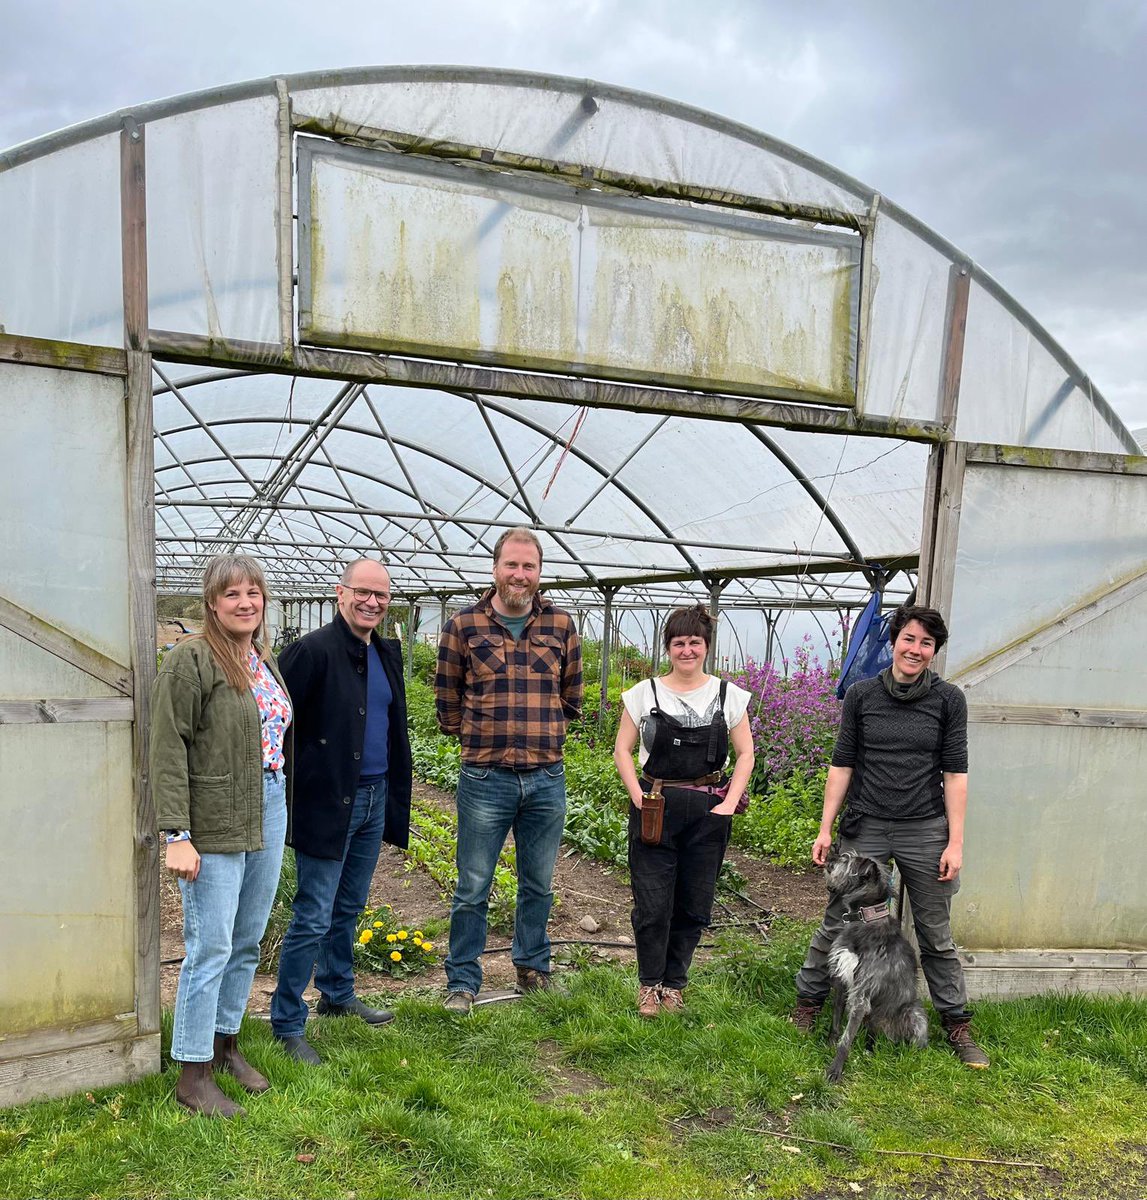 Brilliant visit to @ComrieCroft and Tomnah'a Market Garden today. If you want to escape for a few days for biking,nature, seeing,eating quality local food, seasonal flower growing and meeting fabulous people, this place is for you. m.comriecroft.com tomnaha.com